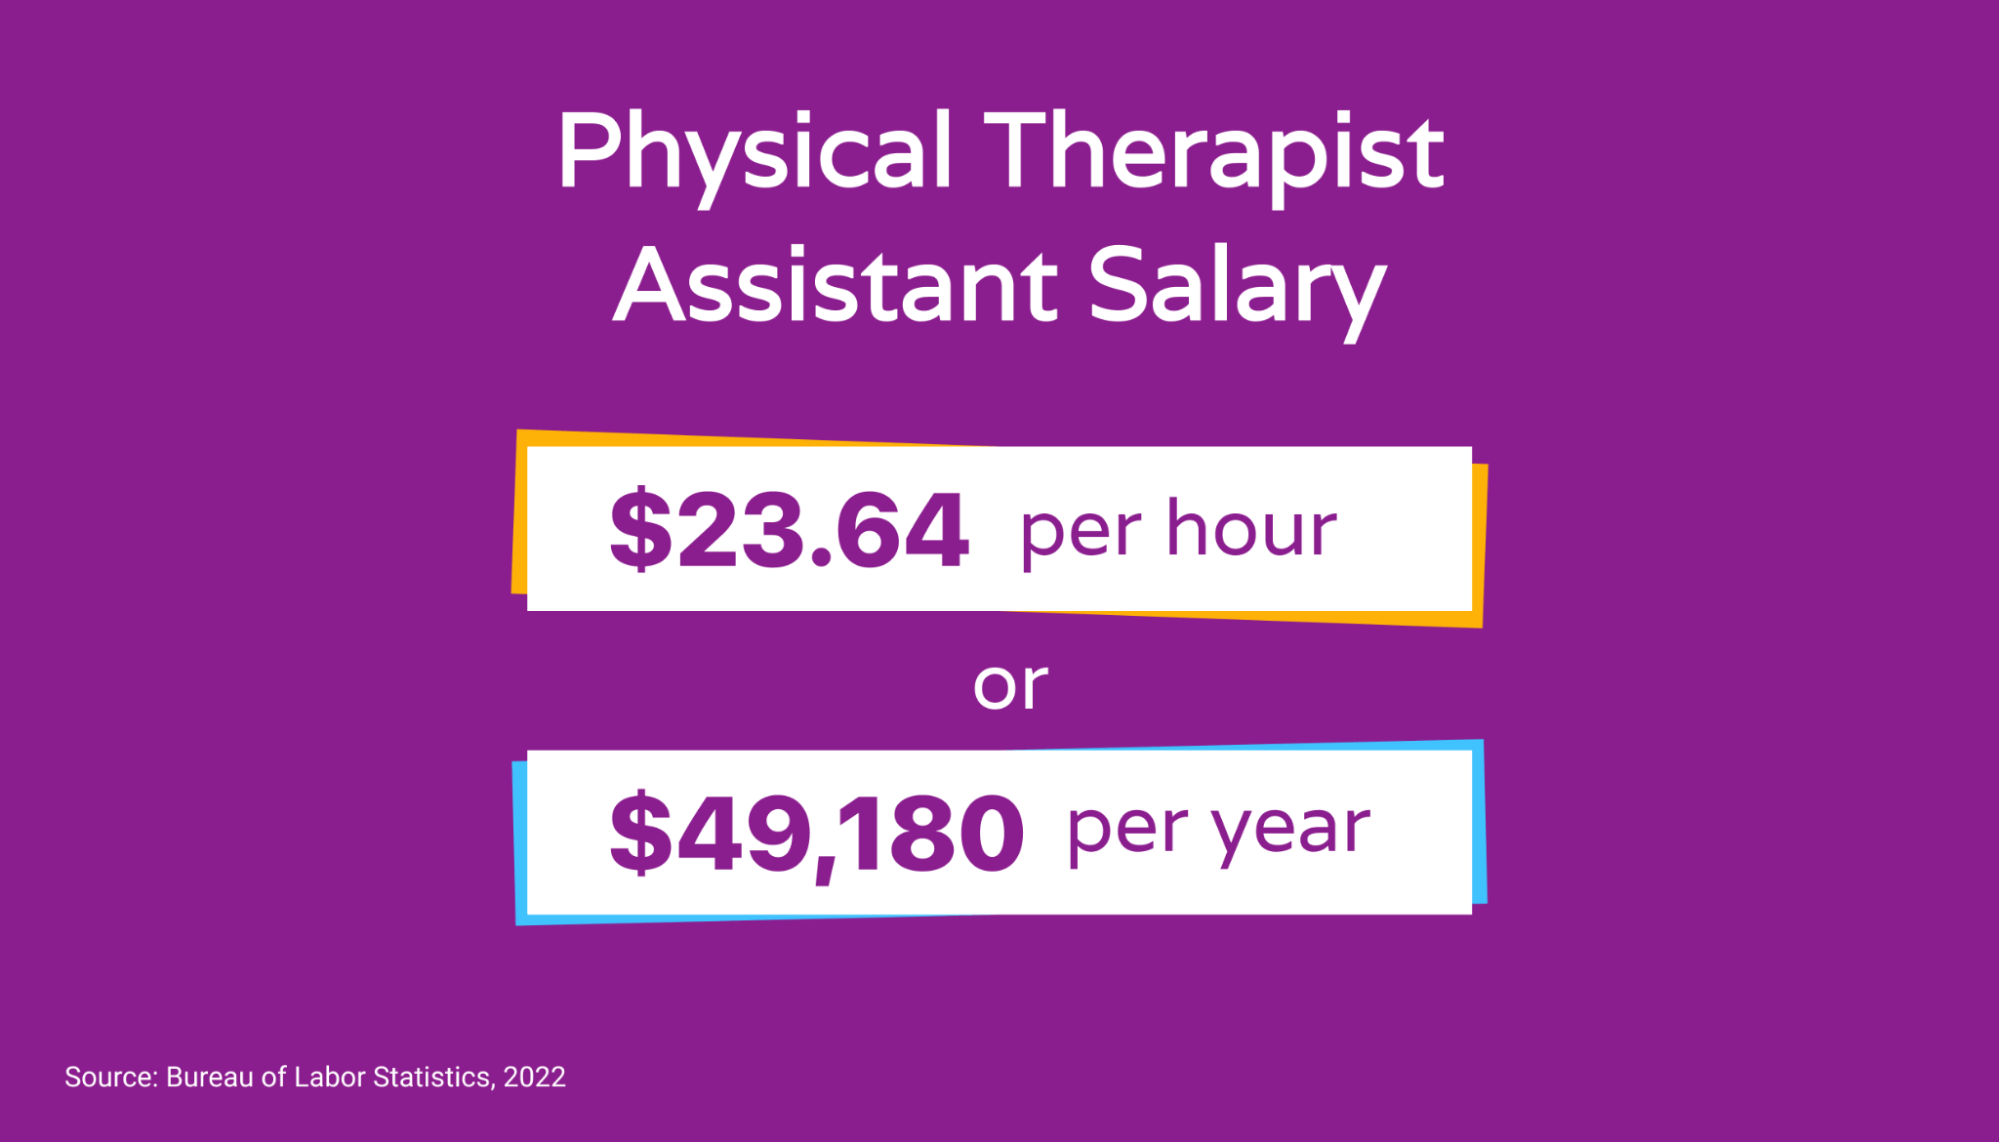 Image showing the average hourly and yearly salary of physical therapy assistants